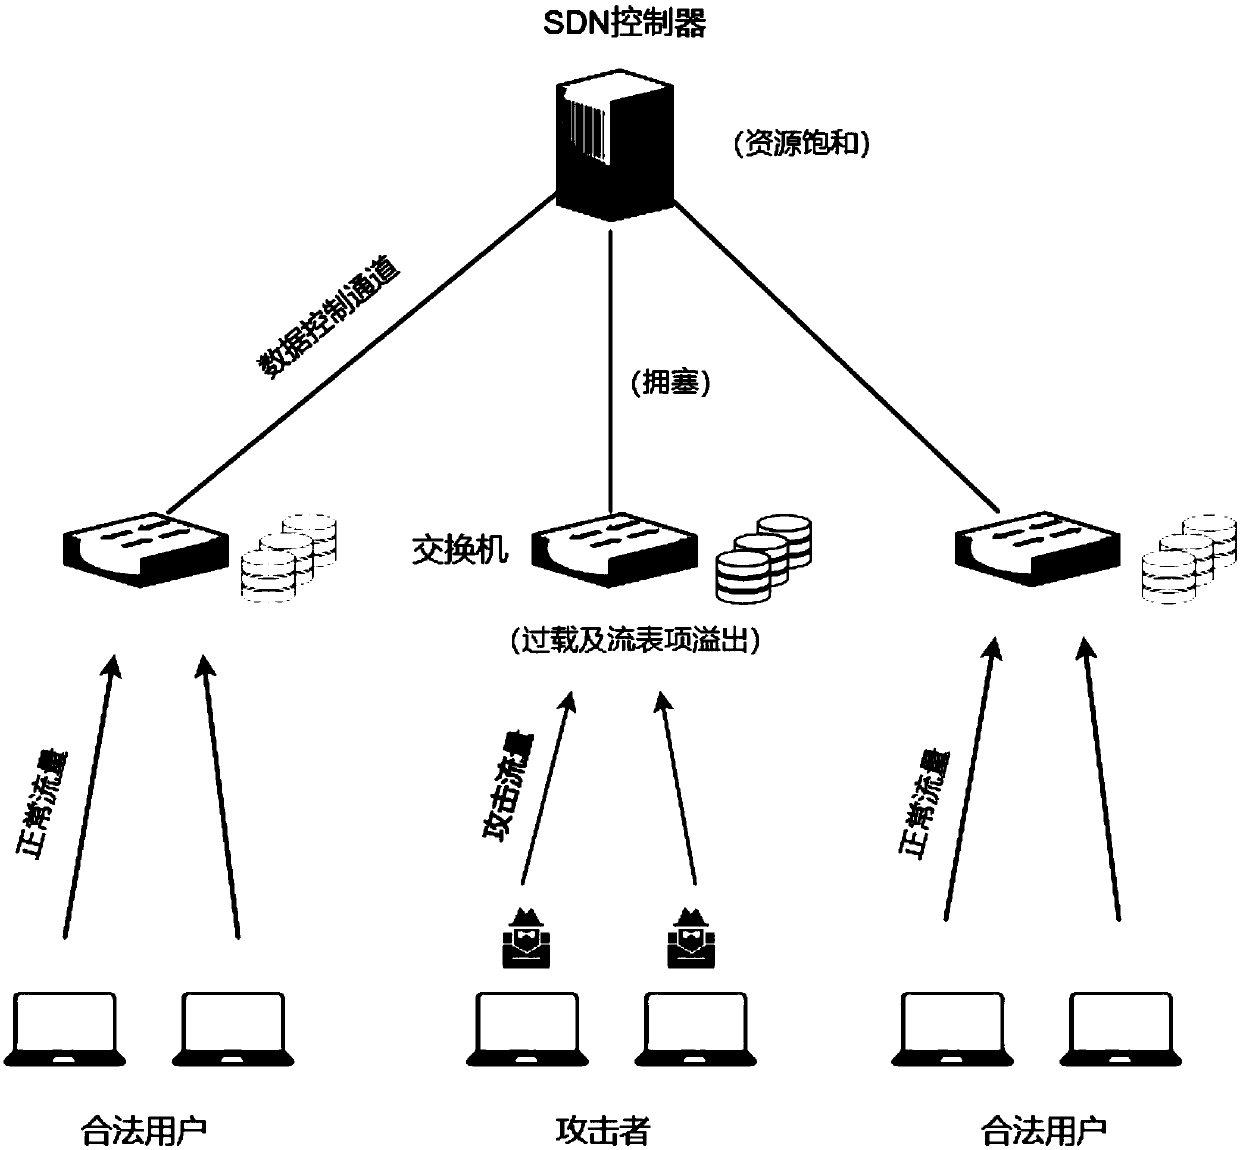 DDoS attack defense method and defense system of SDN controller